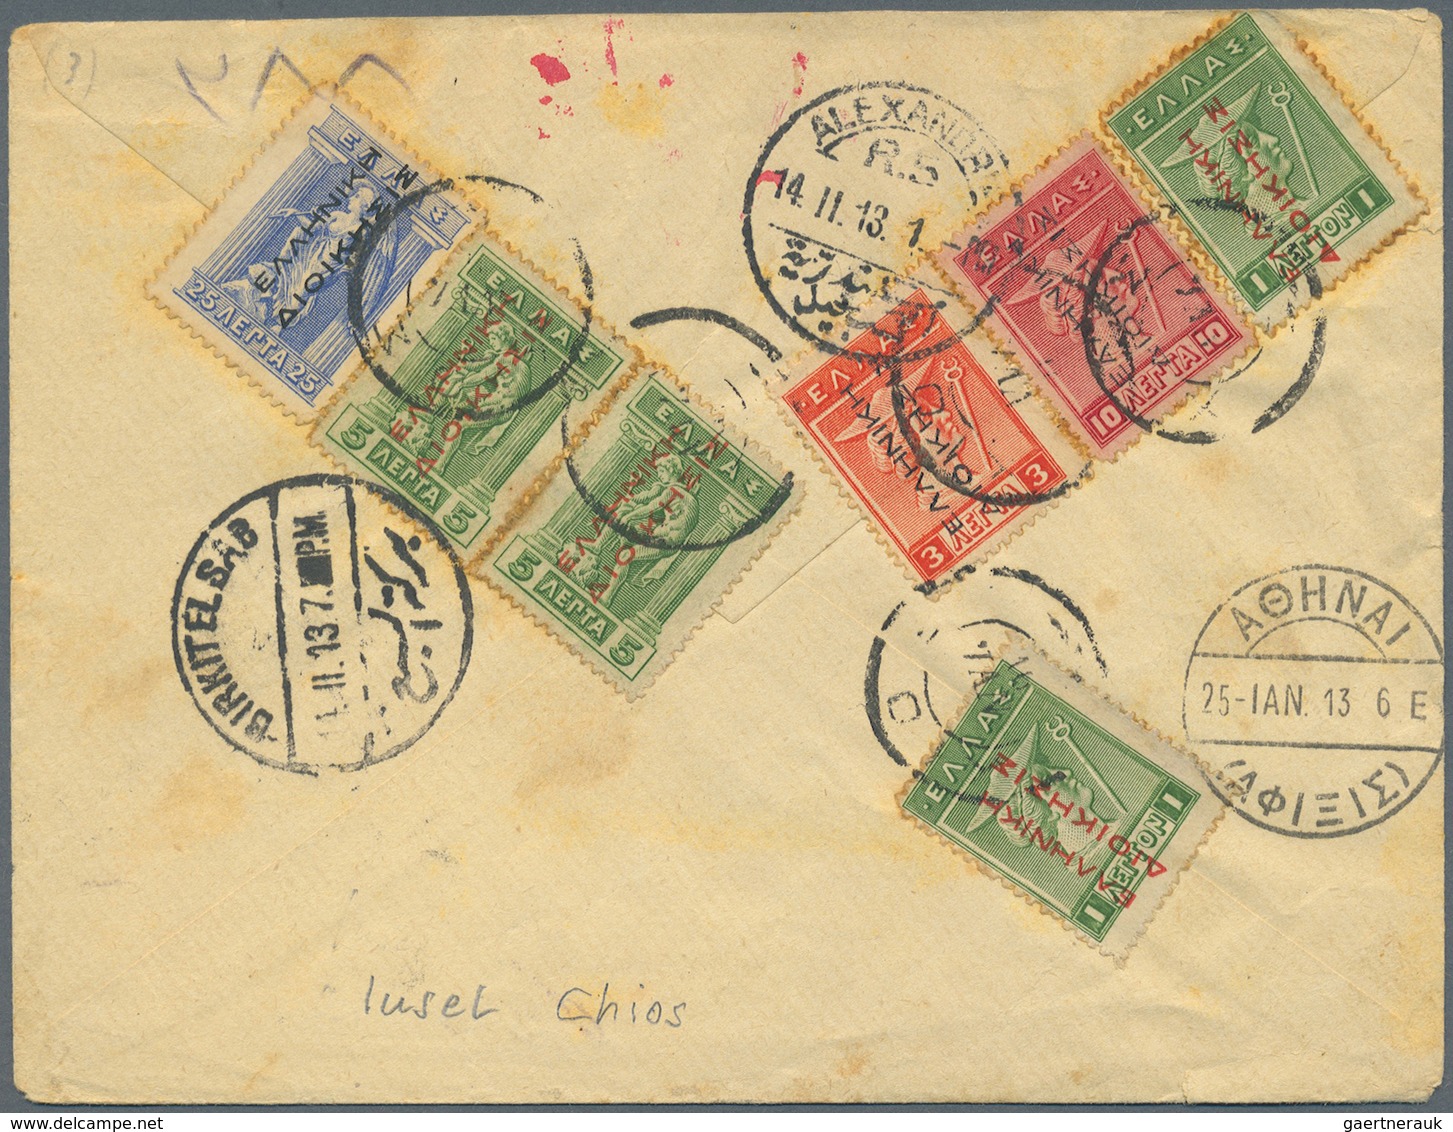 Br/ Griechenland: 1900-1922, 34 covers / cards including good cancellations of italian occupation Dodeca